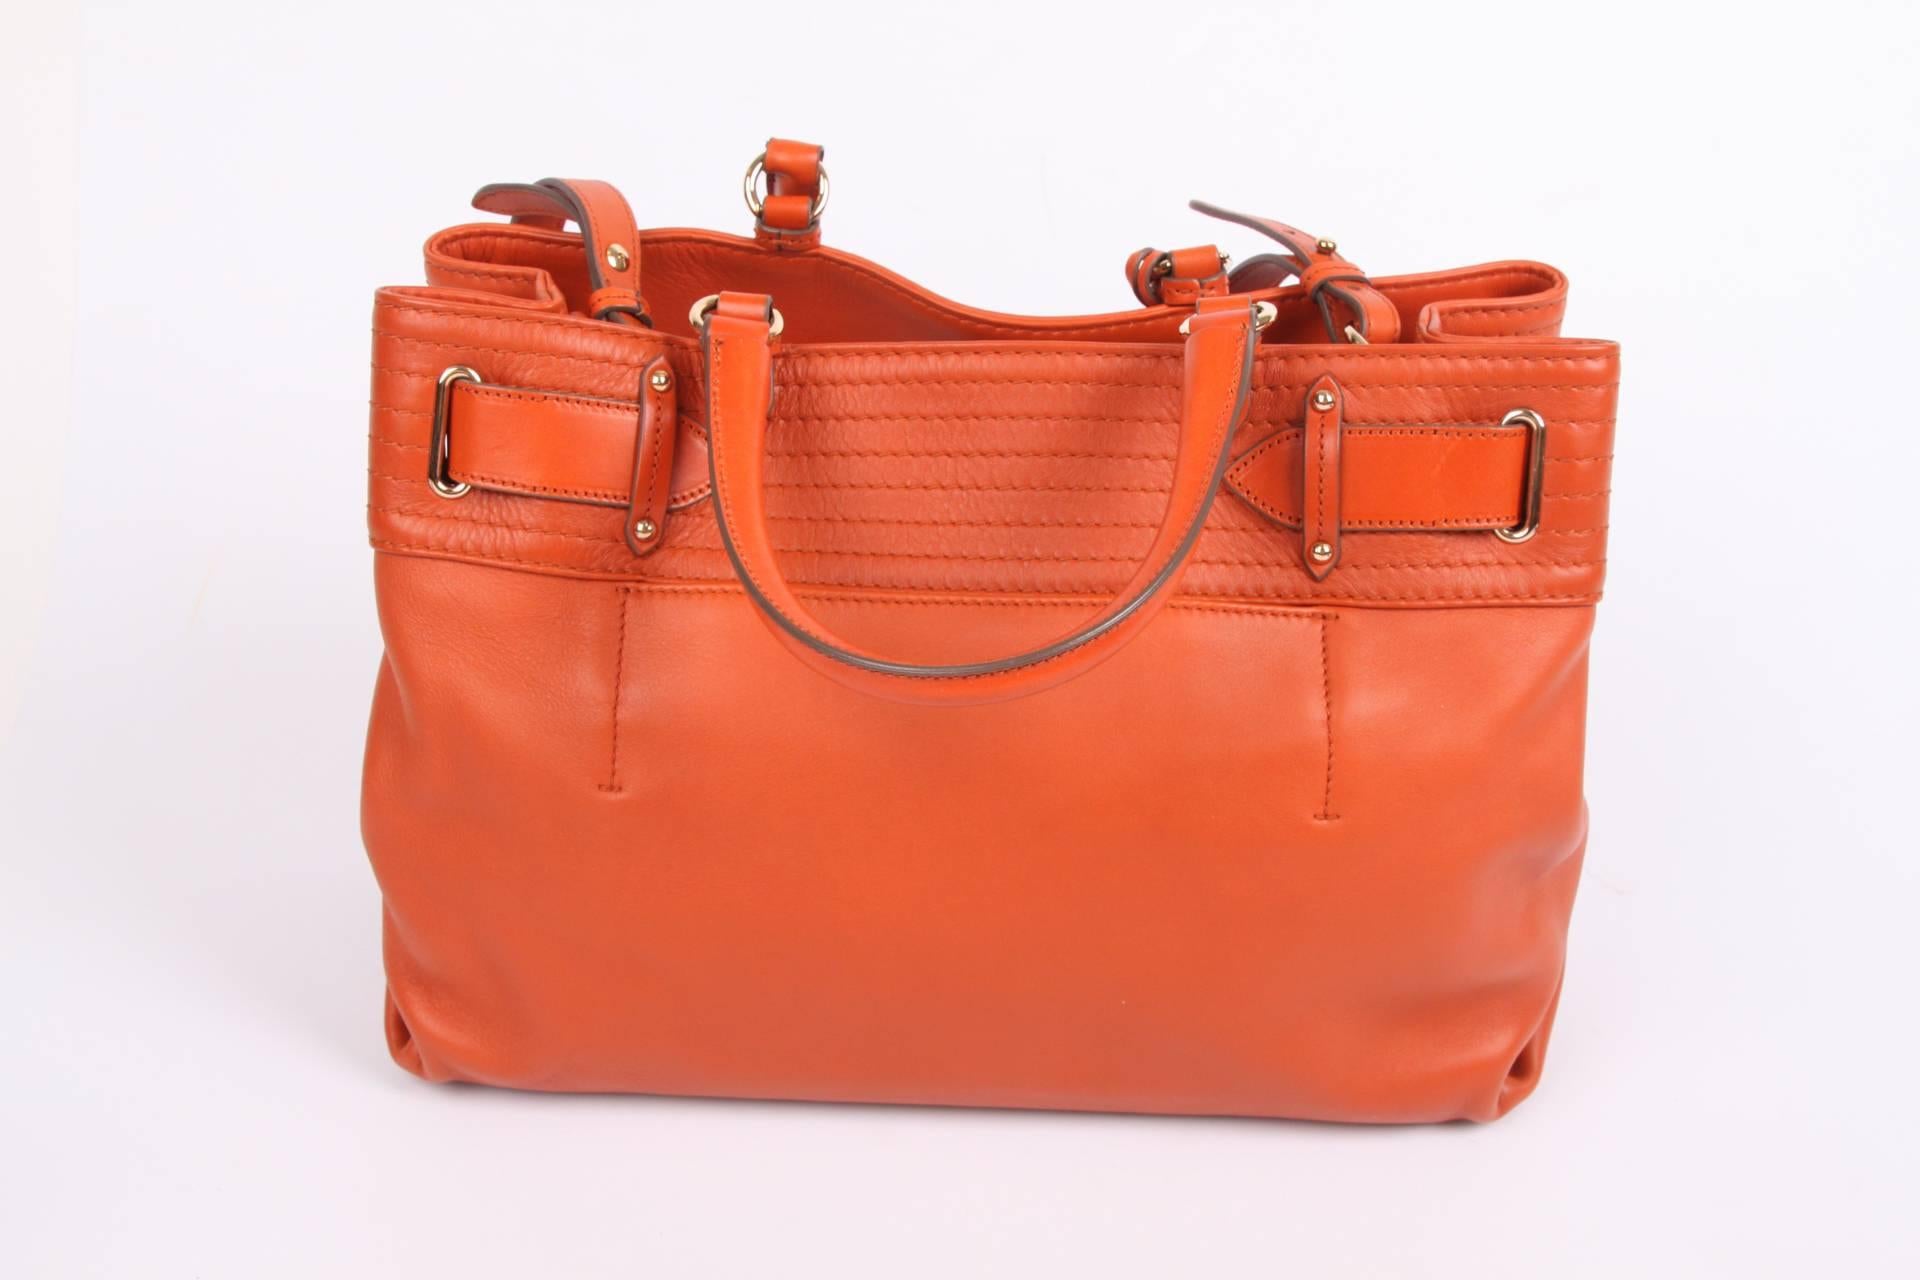 Super stylish bag by Salvatore Ferragamo, due to its rather large size also very suitable for the office. Very pretty!

Made of calfskin leather in a warm shade of orange. Two handles on top and also an adjustable and detachable shoulder strap. An